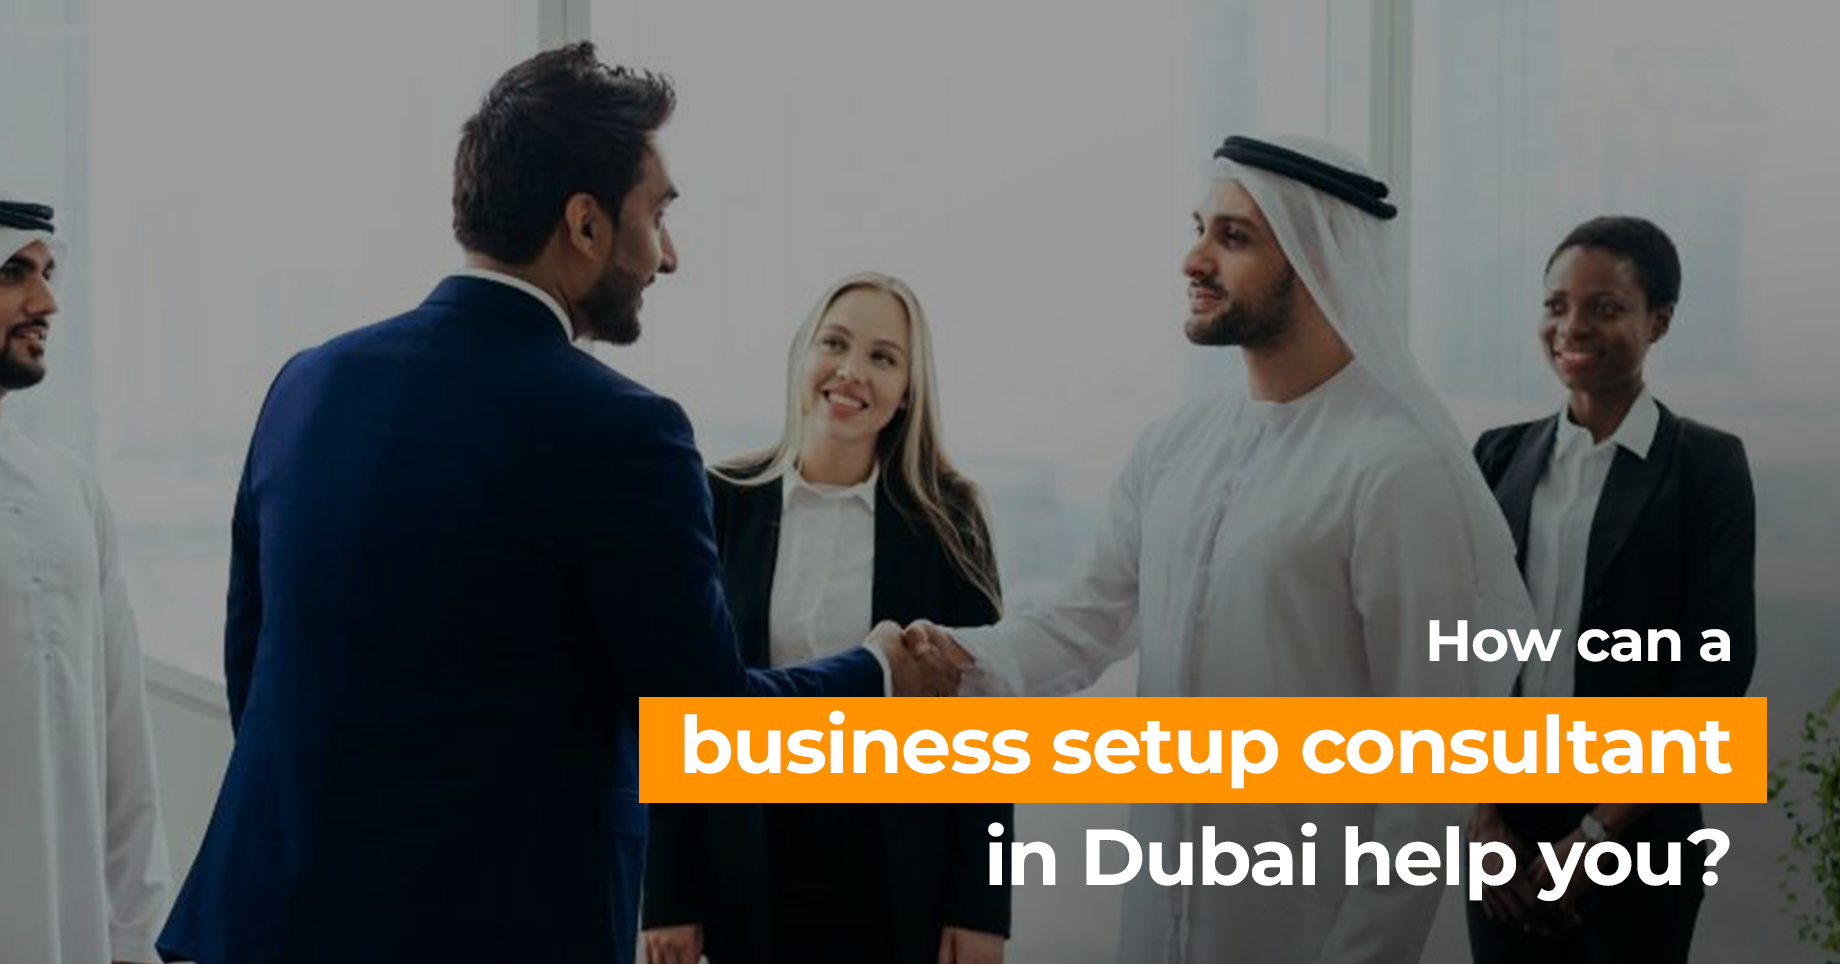 How Can a Business Setup Consultant in Dubai Help You